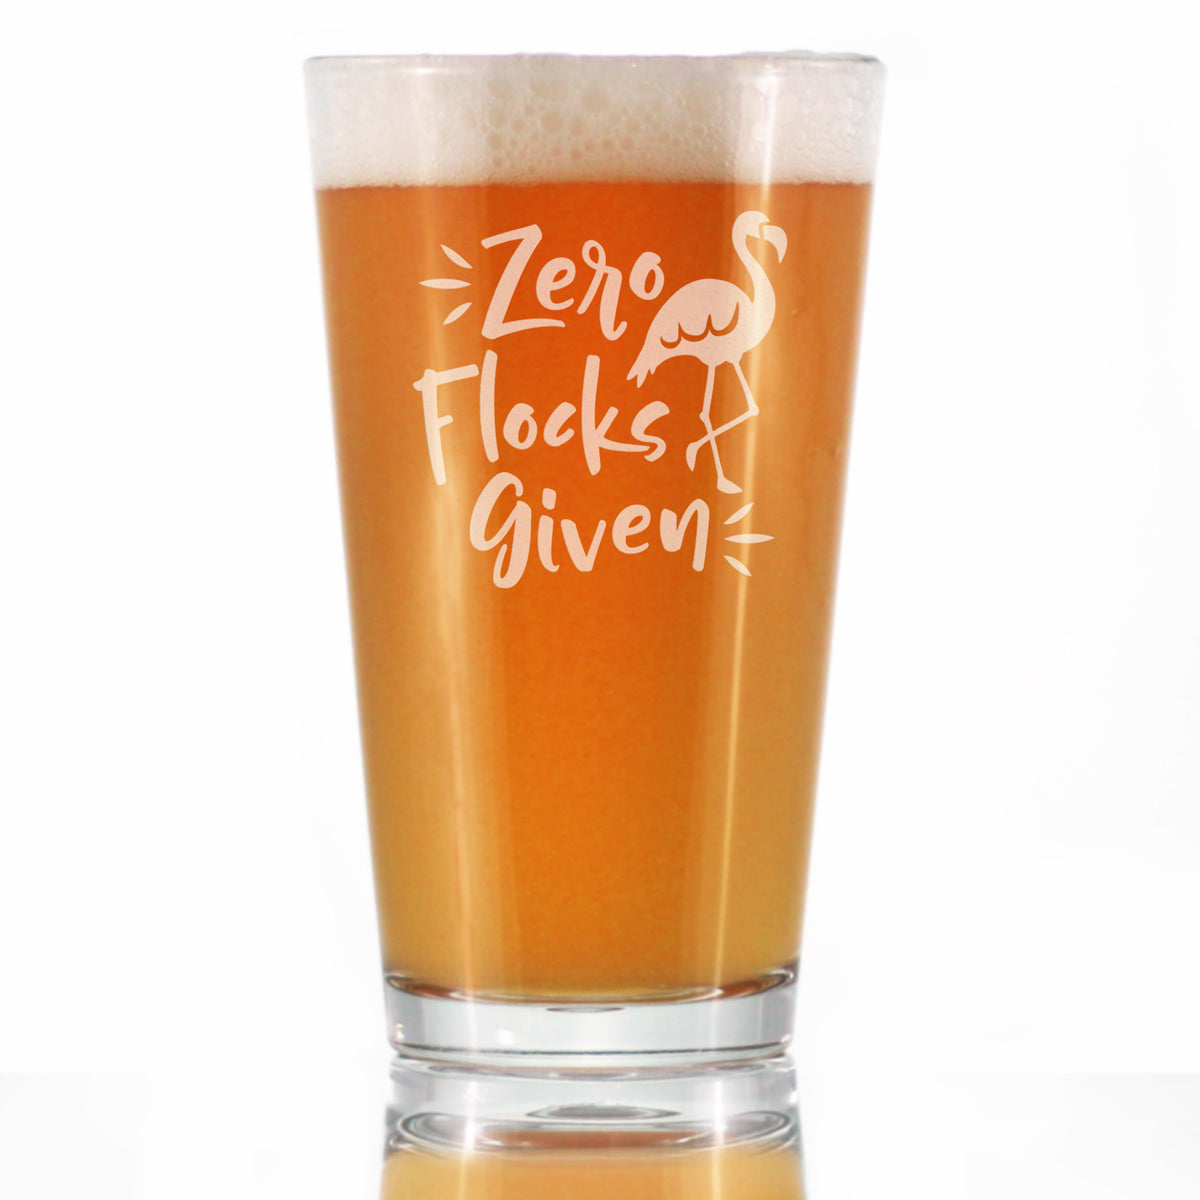 Zero Flocks Given - Funny Flamingo Pint Glass Gift for Beer - Bird Gifts for Men &amp; Women - Cute Unique Drinking Decor